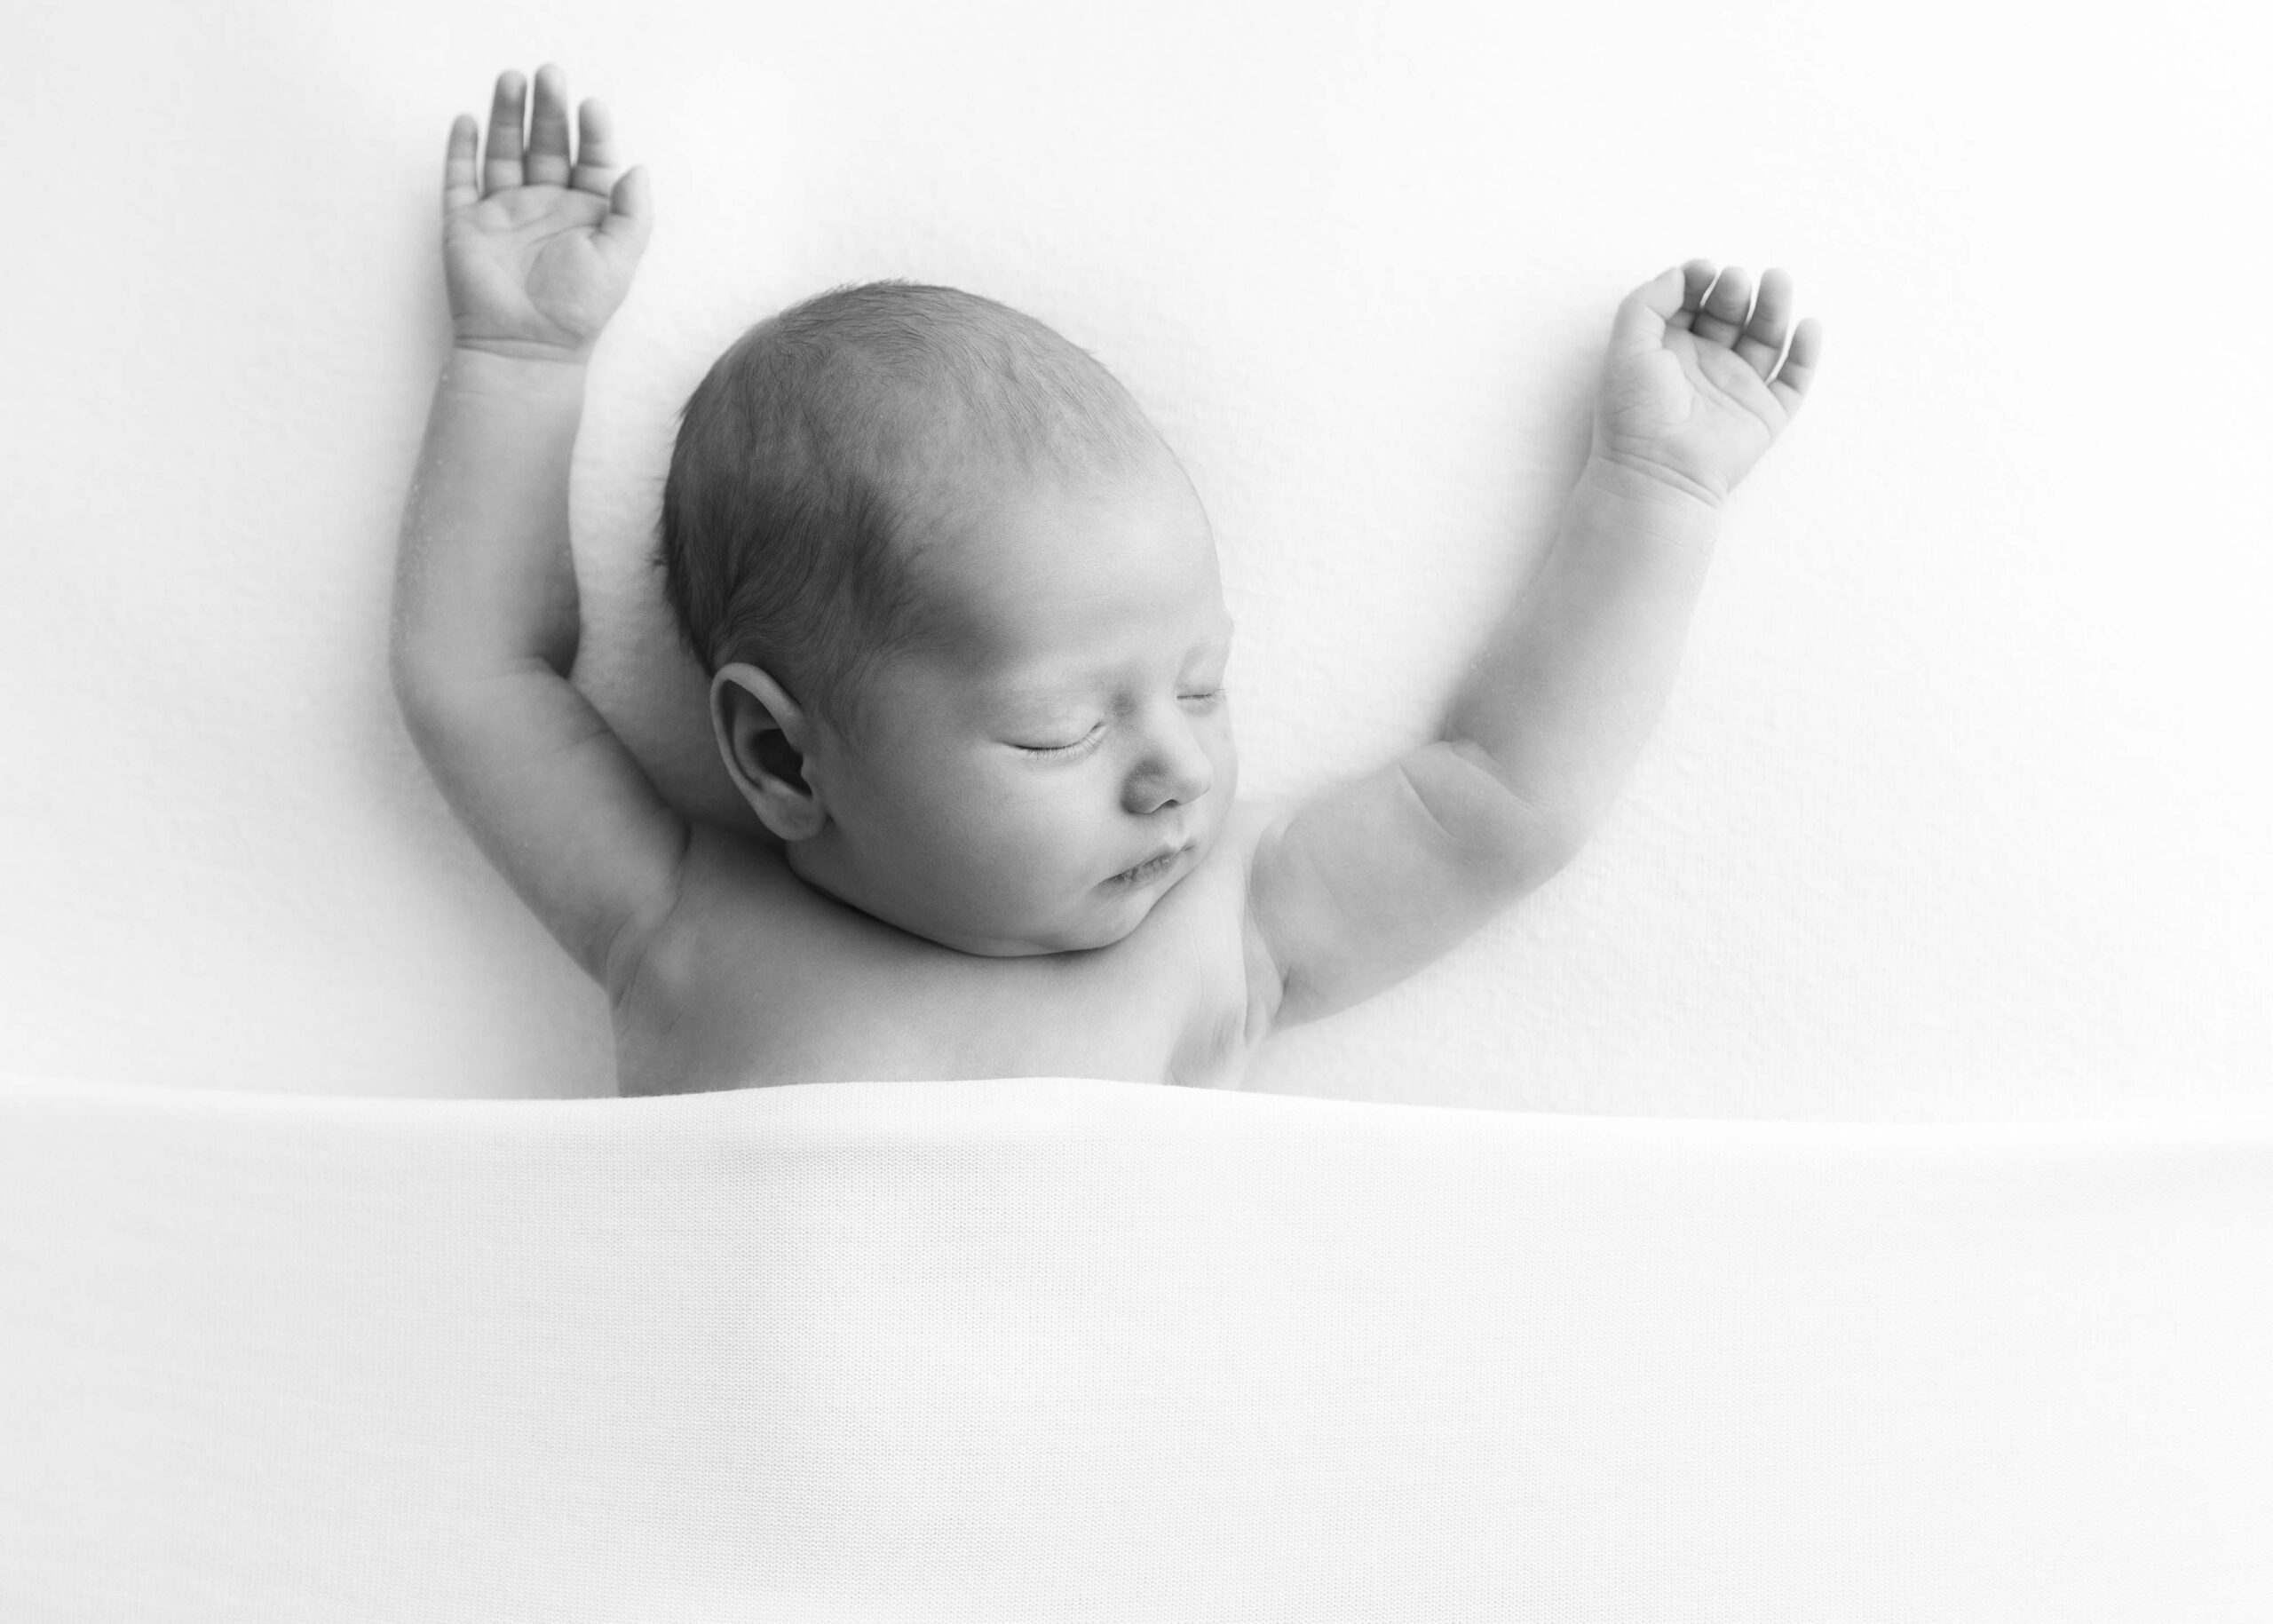 Newborn sleeping under white blanket with arms outstretched